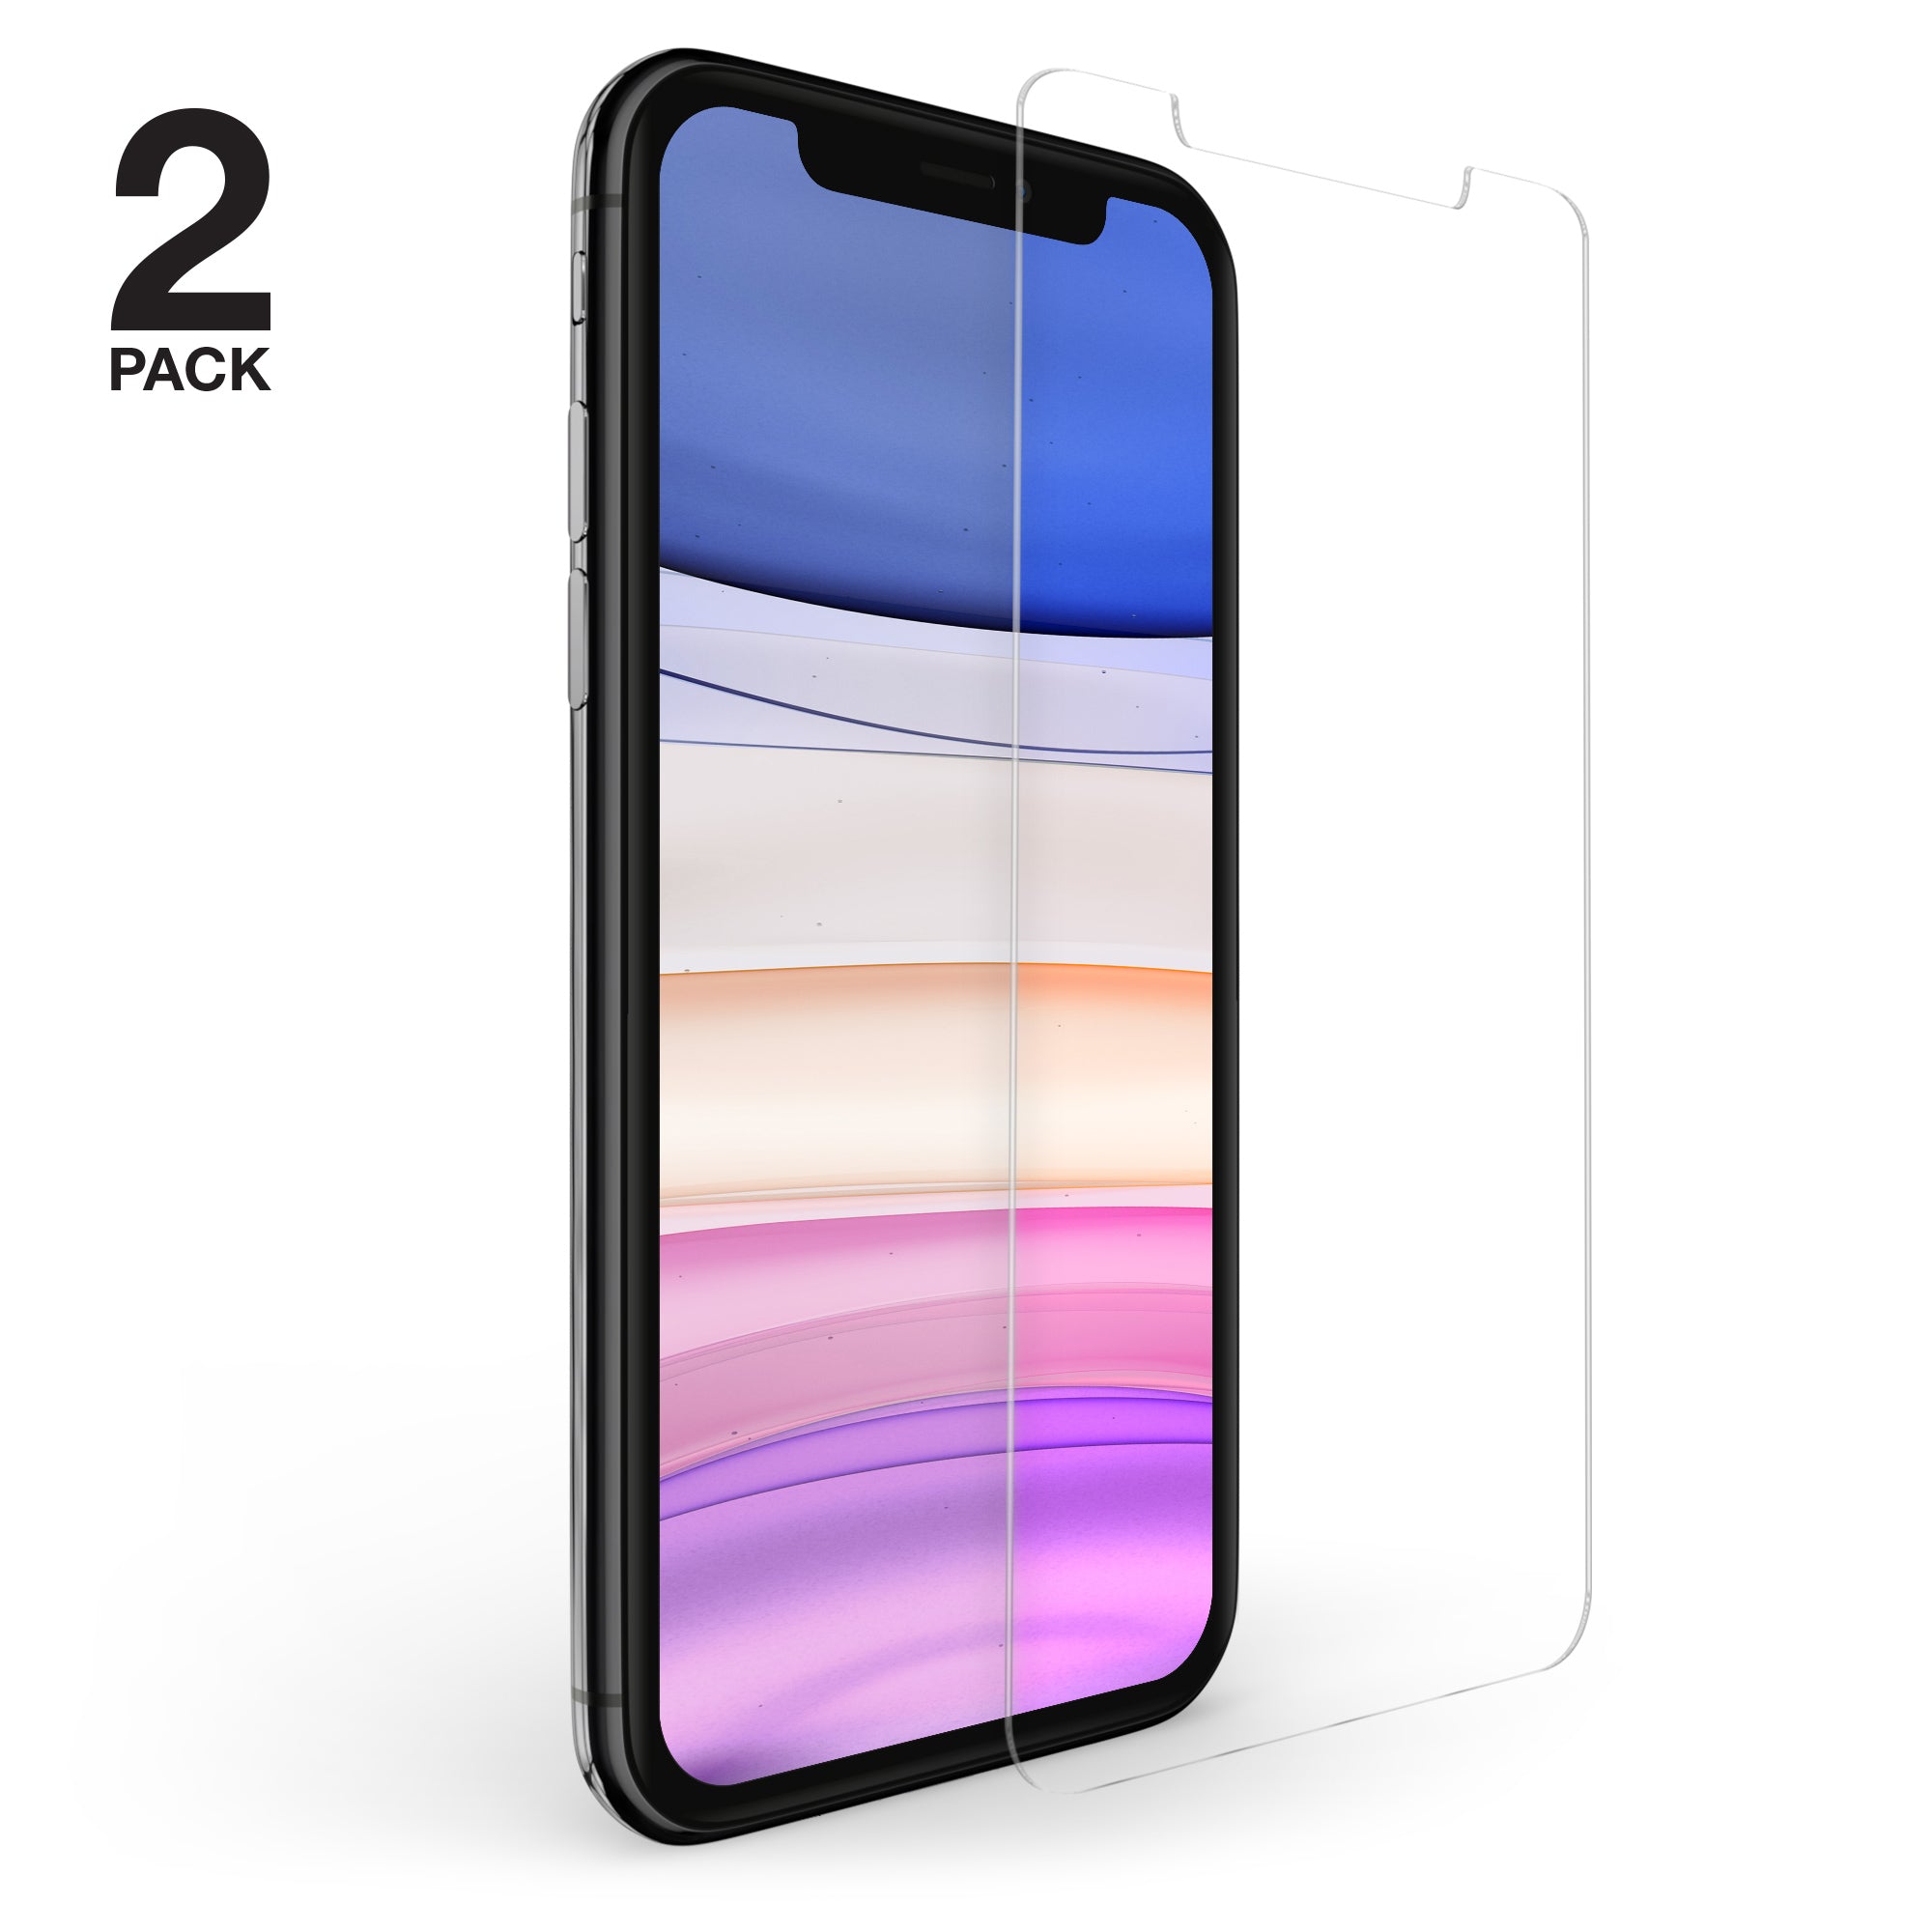 Hypergear Hd Tempered Glass Screen Protector For Iphone 11 Pro Max Xs Max 2 Pack Hypergear